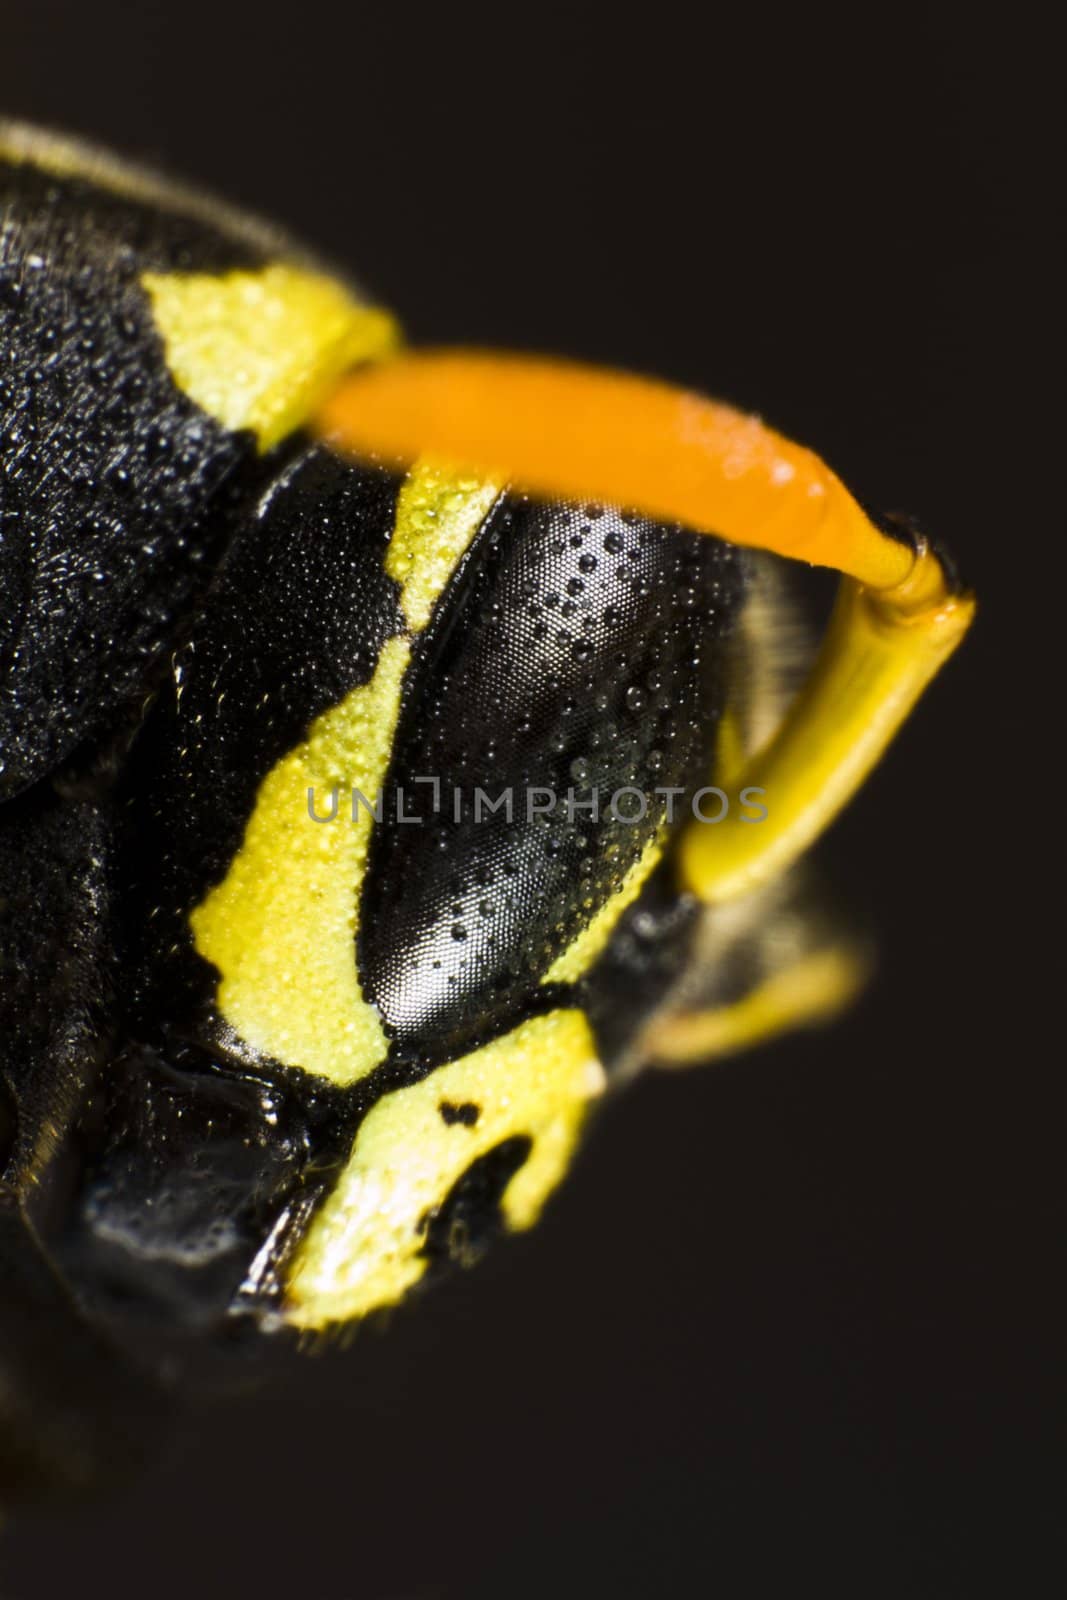 Head of wet wasp in extreme close up on black background